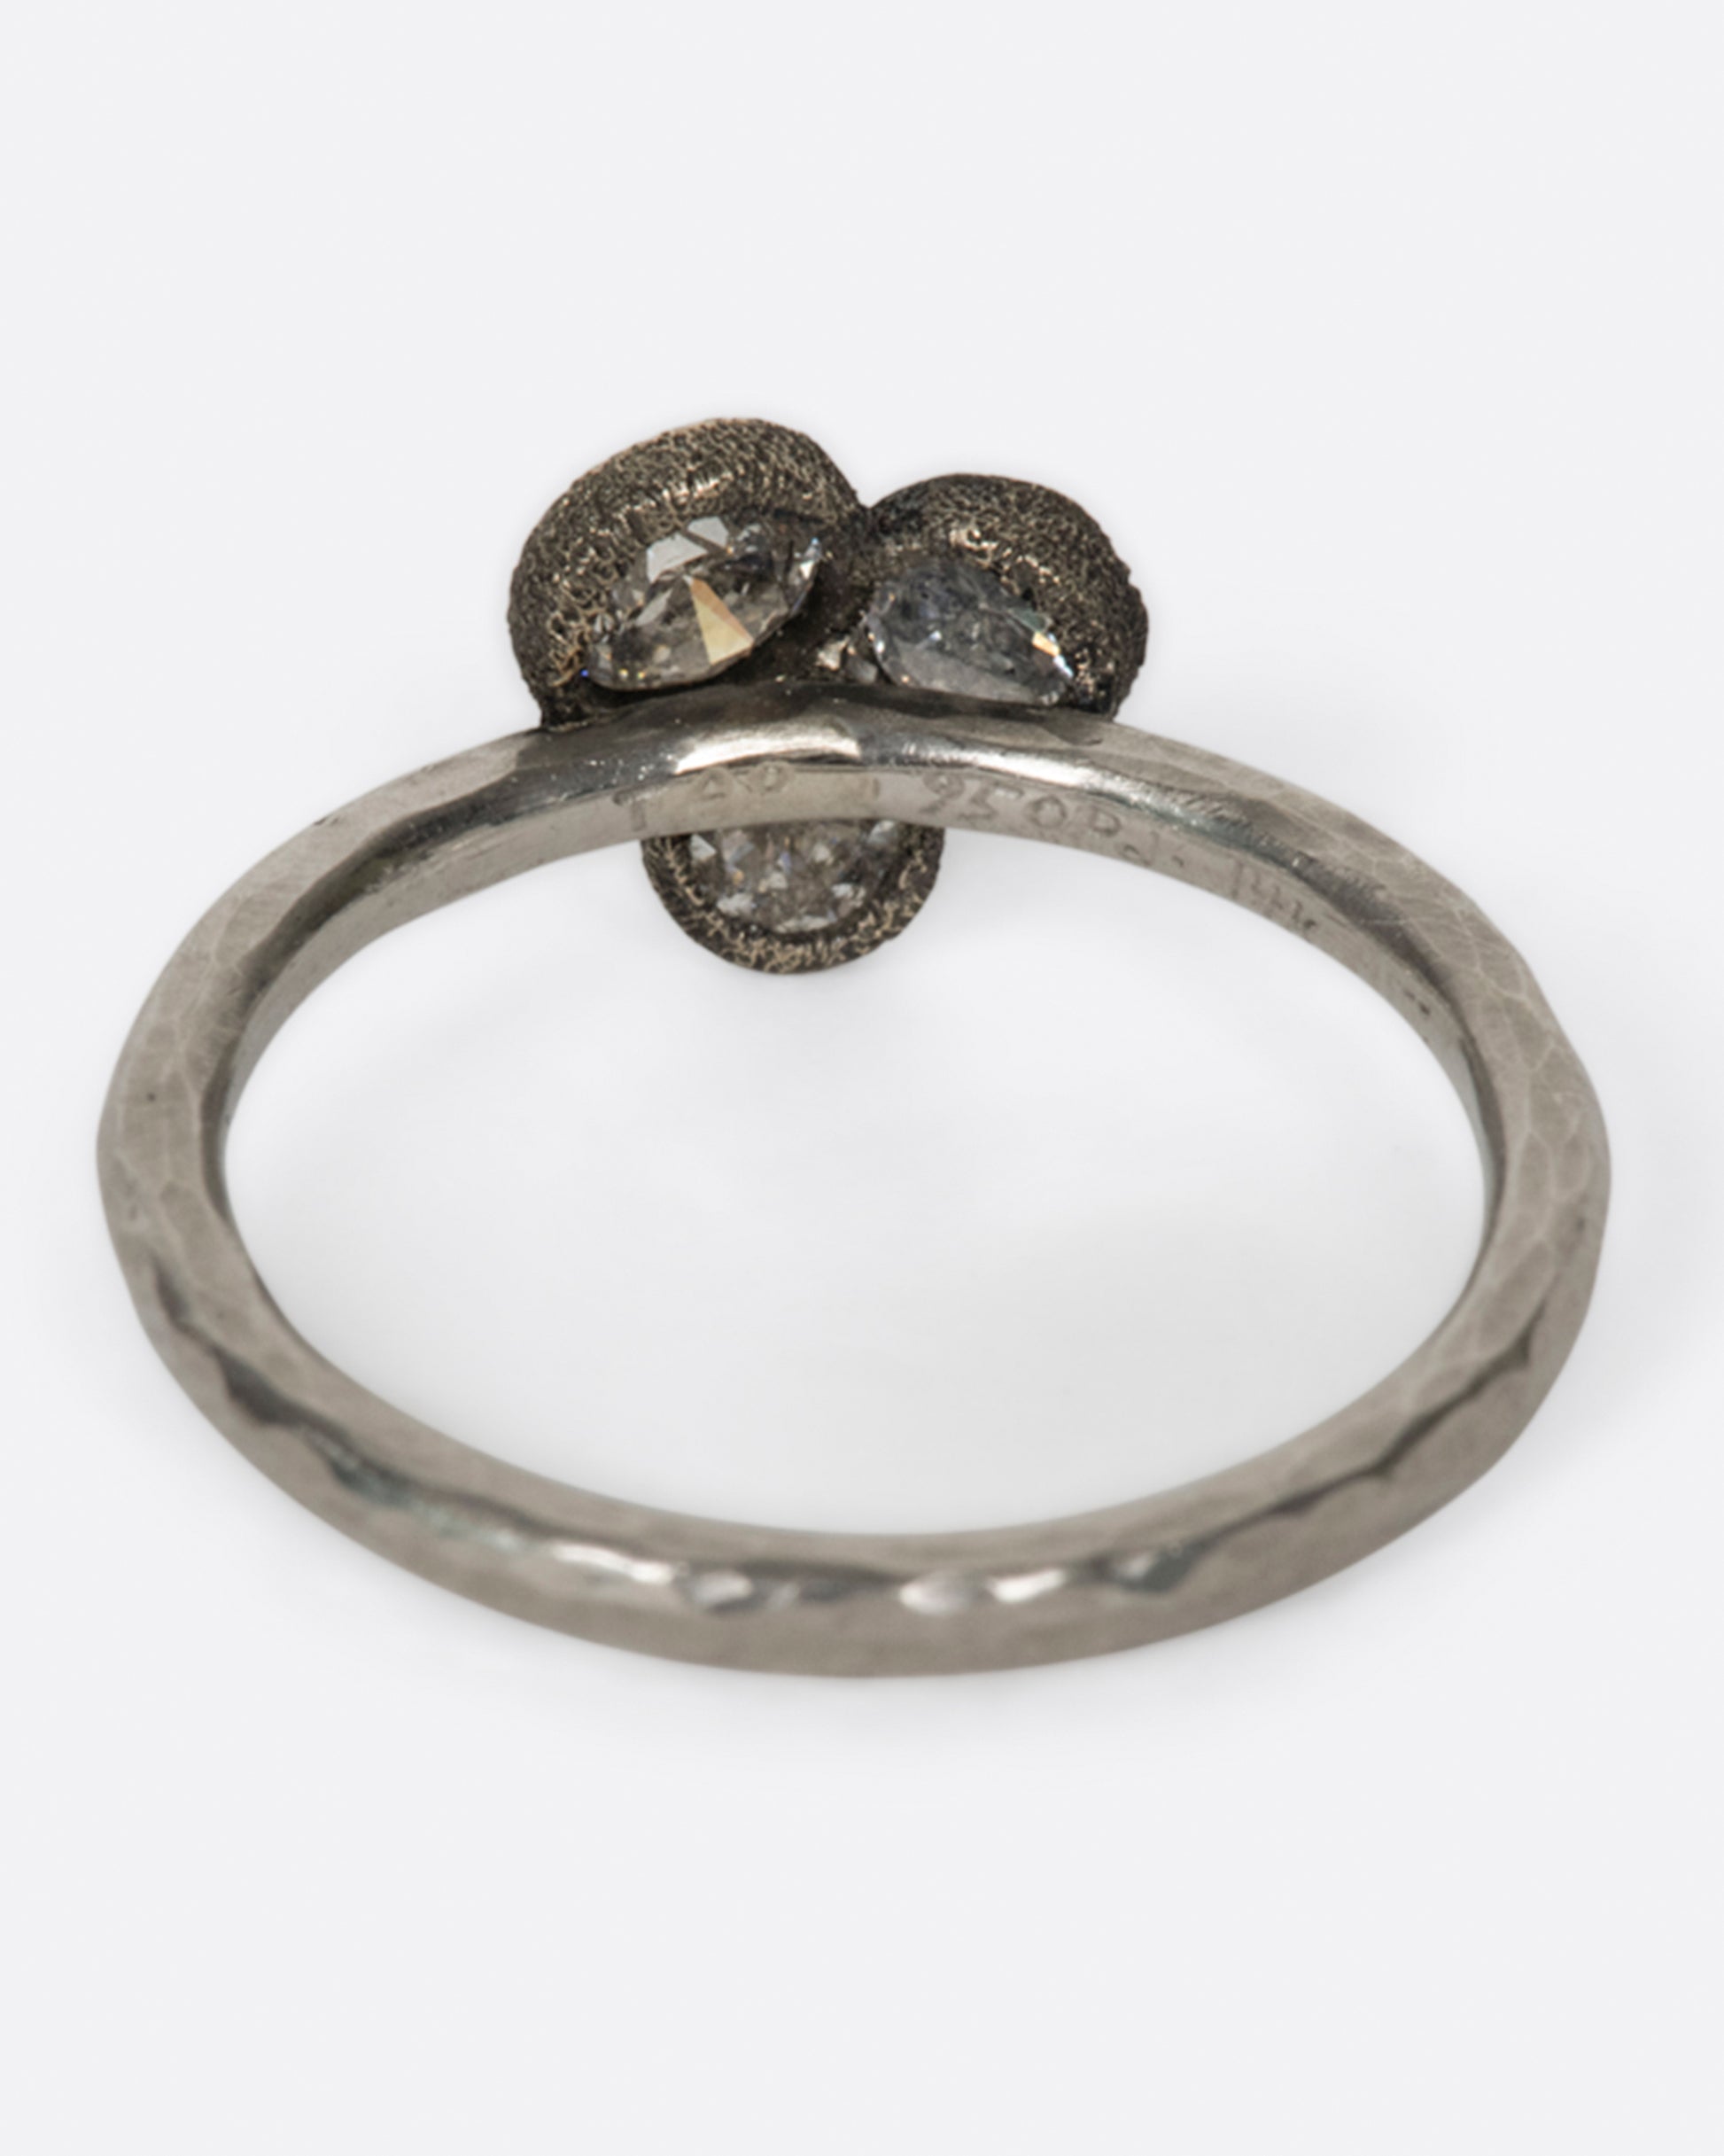 A hammered narrow palladium band with three inverted diamonds clustered in the center, shown from the back.